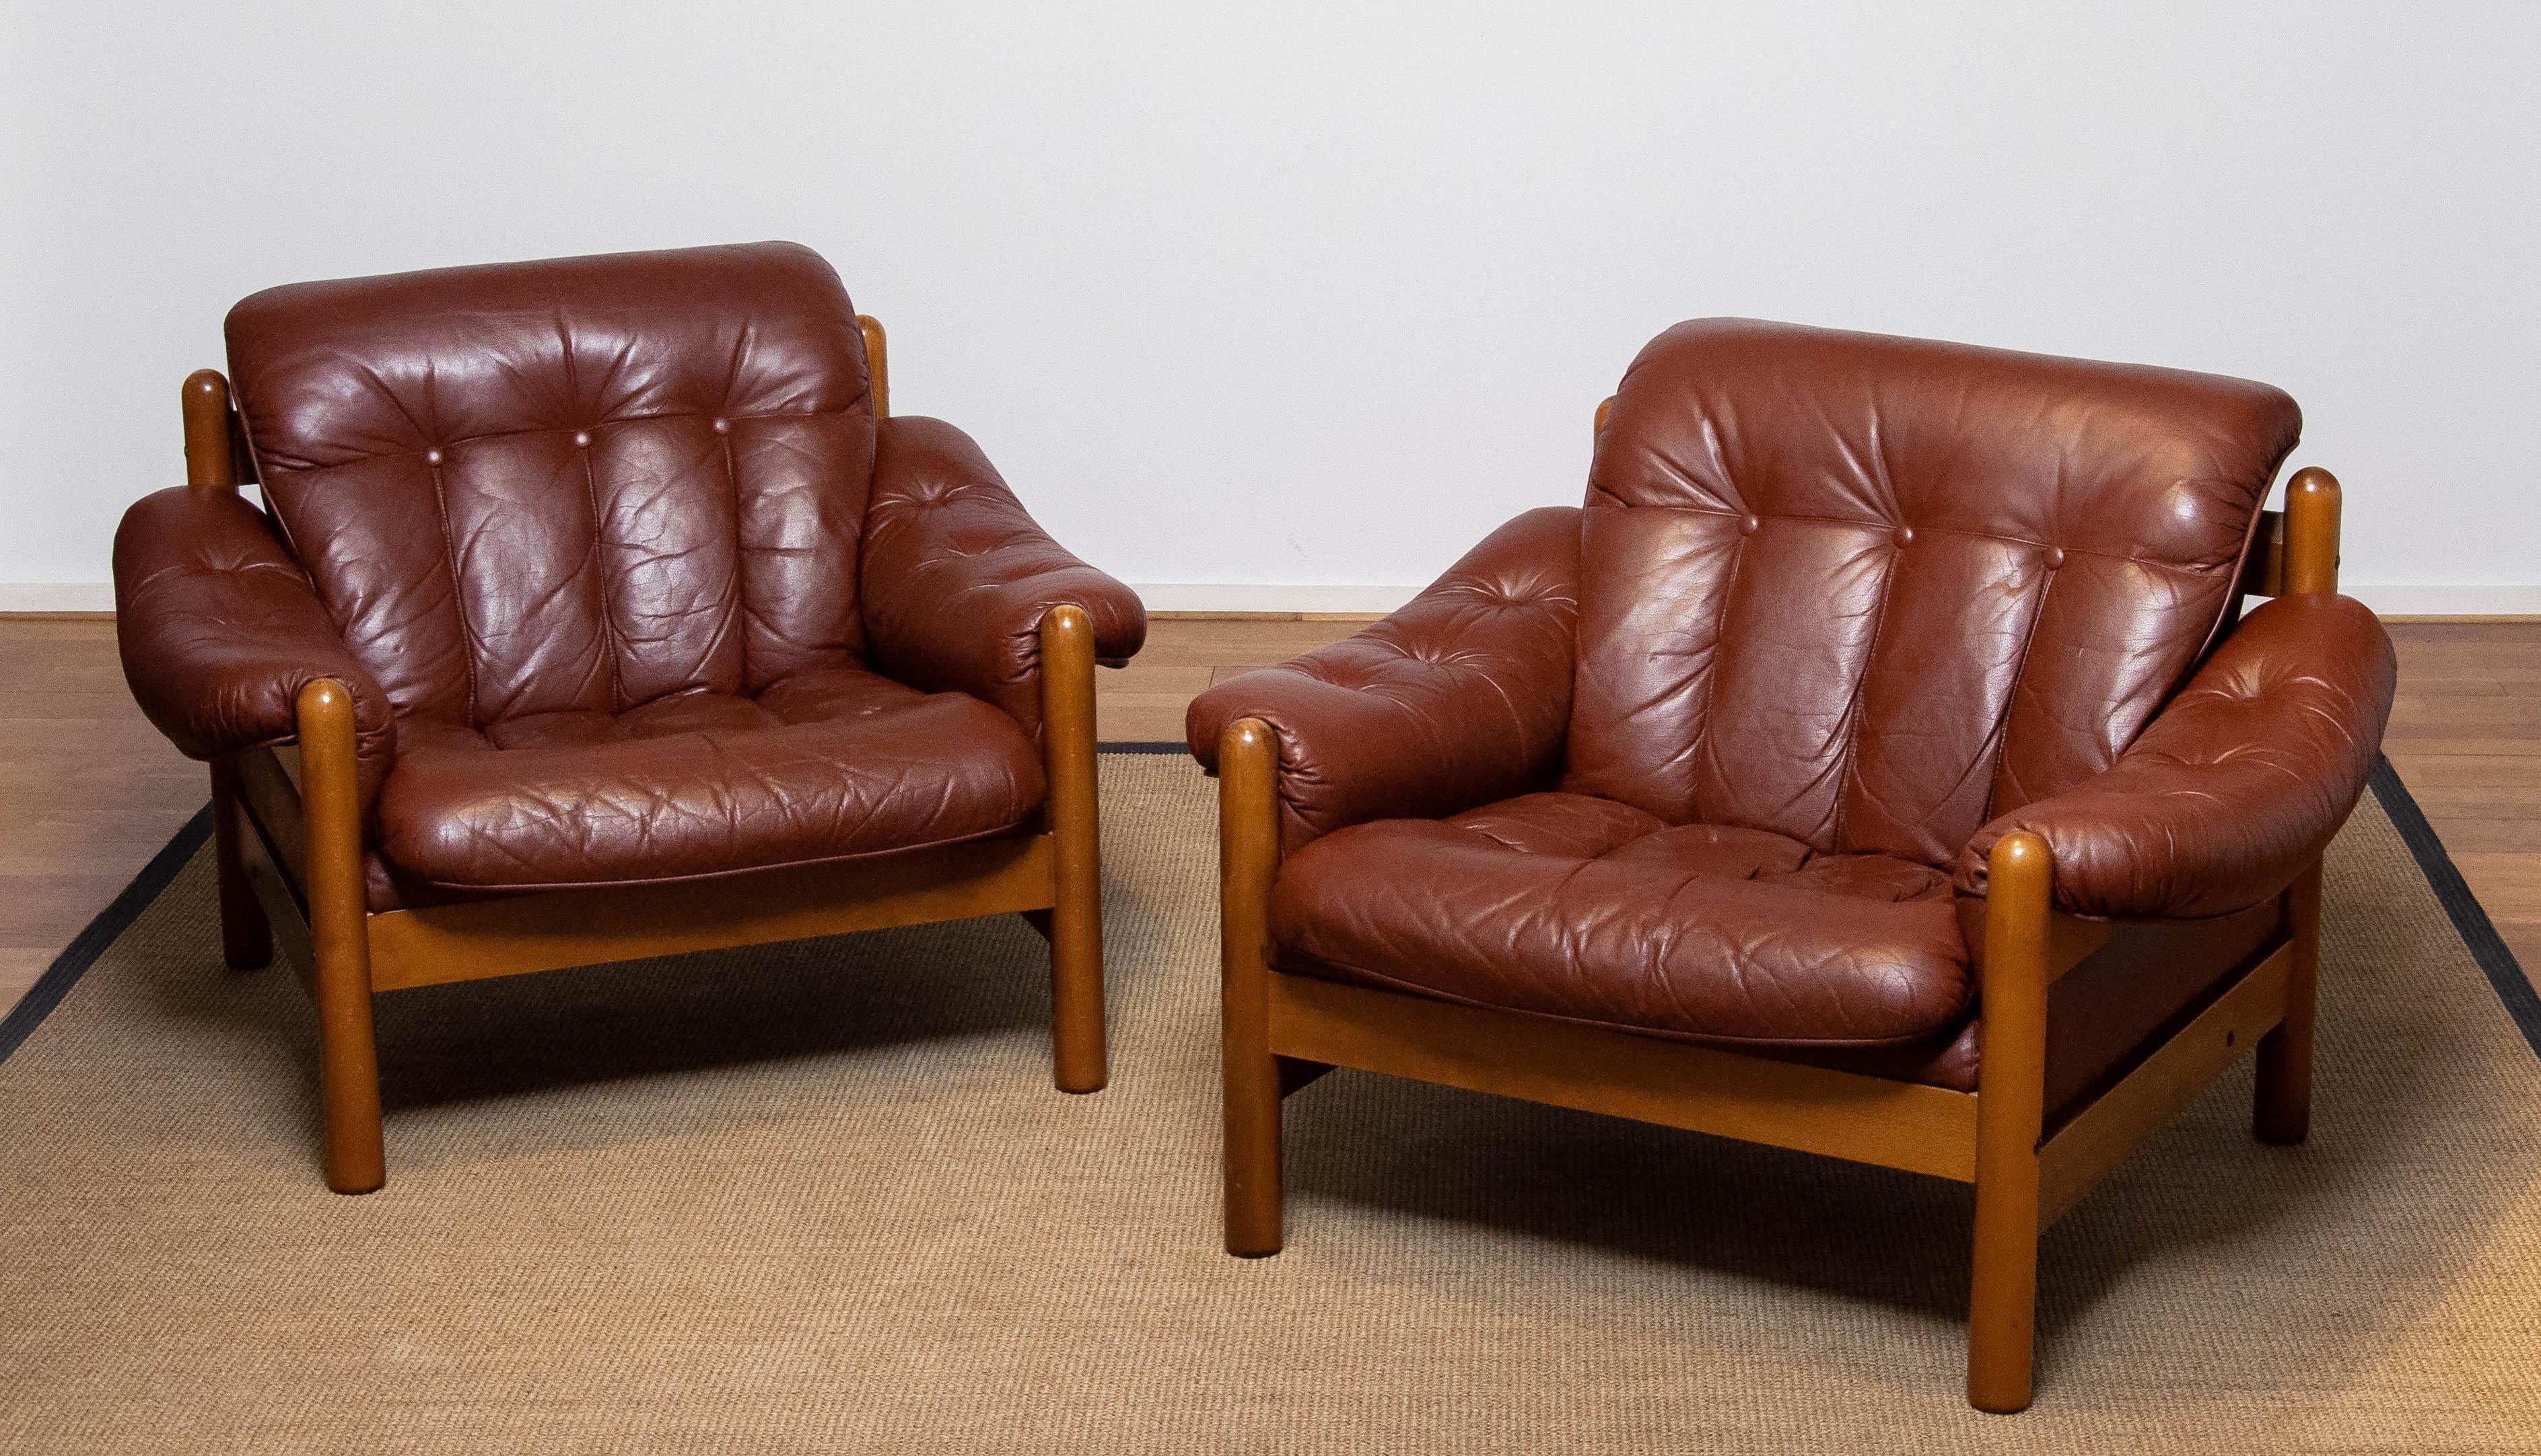 Beautiful pair Brutalist / Brazilian style lounge chairs made by Göte Möbler Nässjö in Sweden in brown leather. The wooden construction is made of beech. Both sits absolutely comfortable even for a longer period. Allover in very good condition but